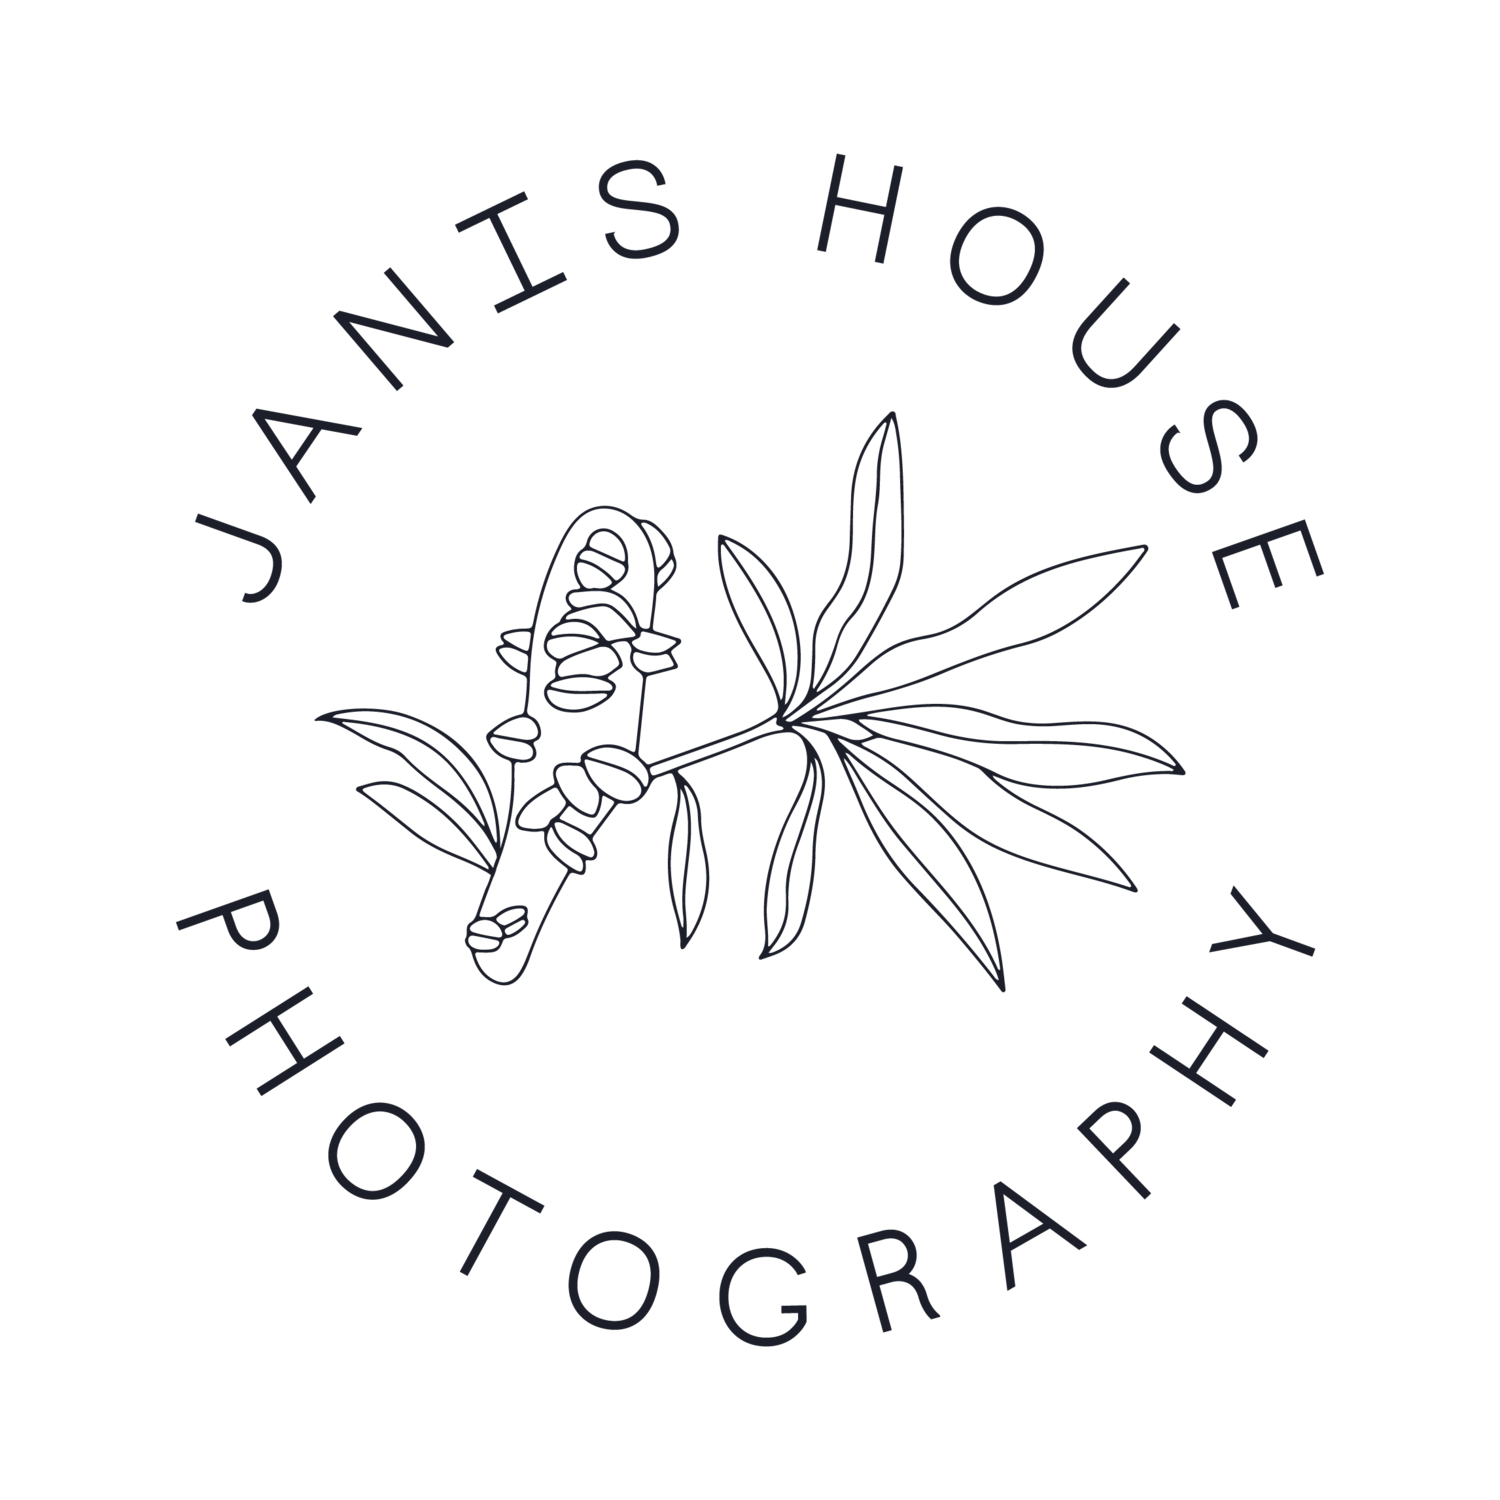 Janis House Photography